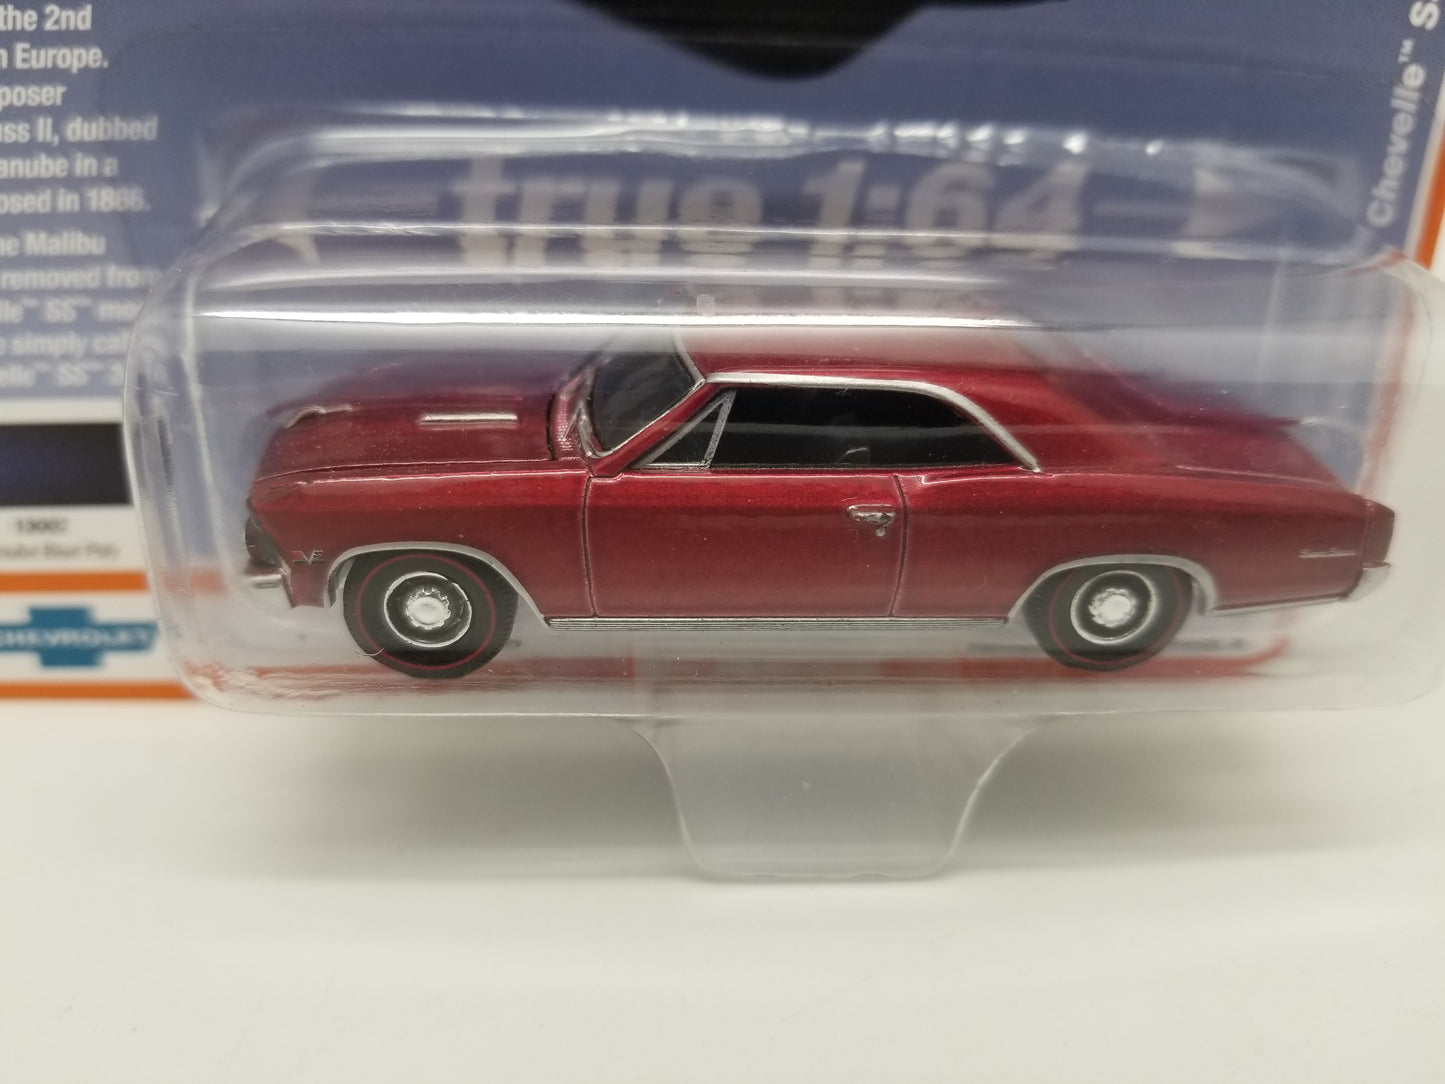 AW CHASE 1966 Chevy Chevelle SS 396 - Vintage Muscle